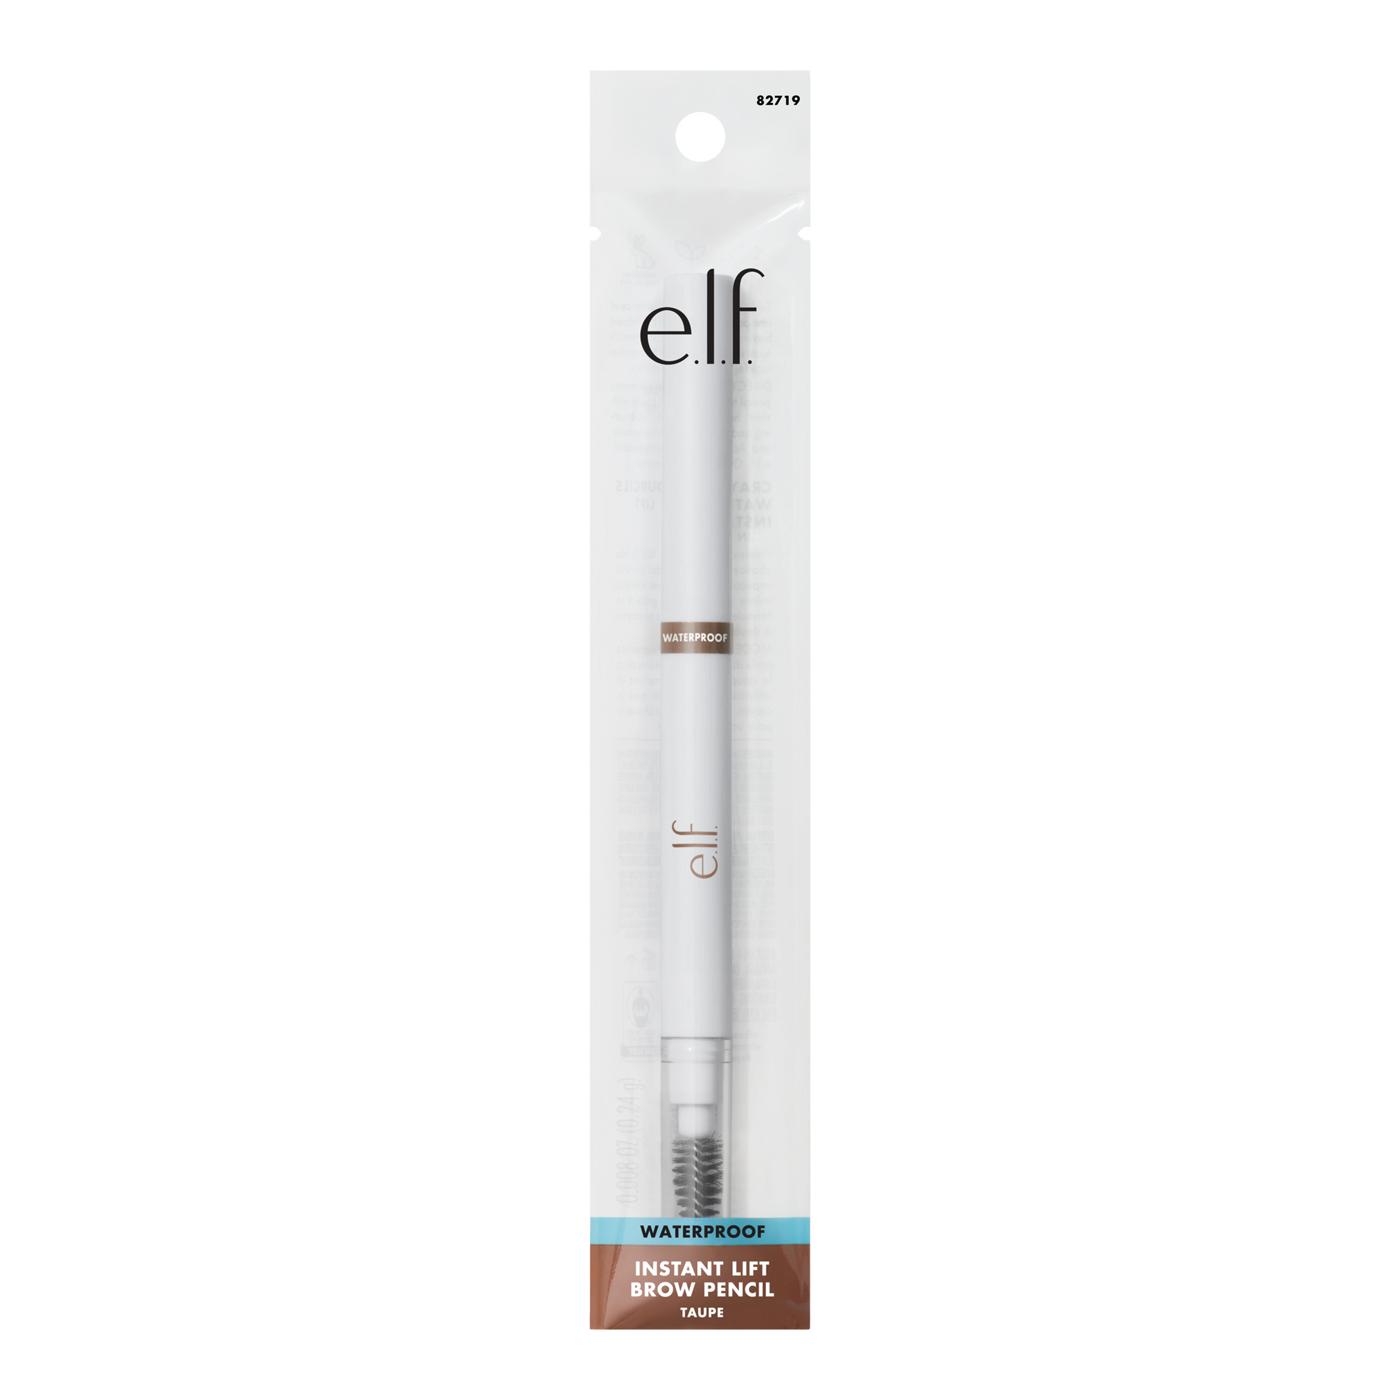 e.l.f. Instant Lift Brow Pencil Waterproof - Taupe; image 1 of 2